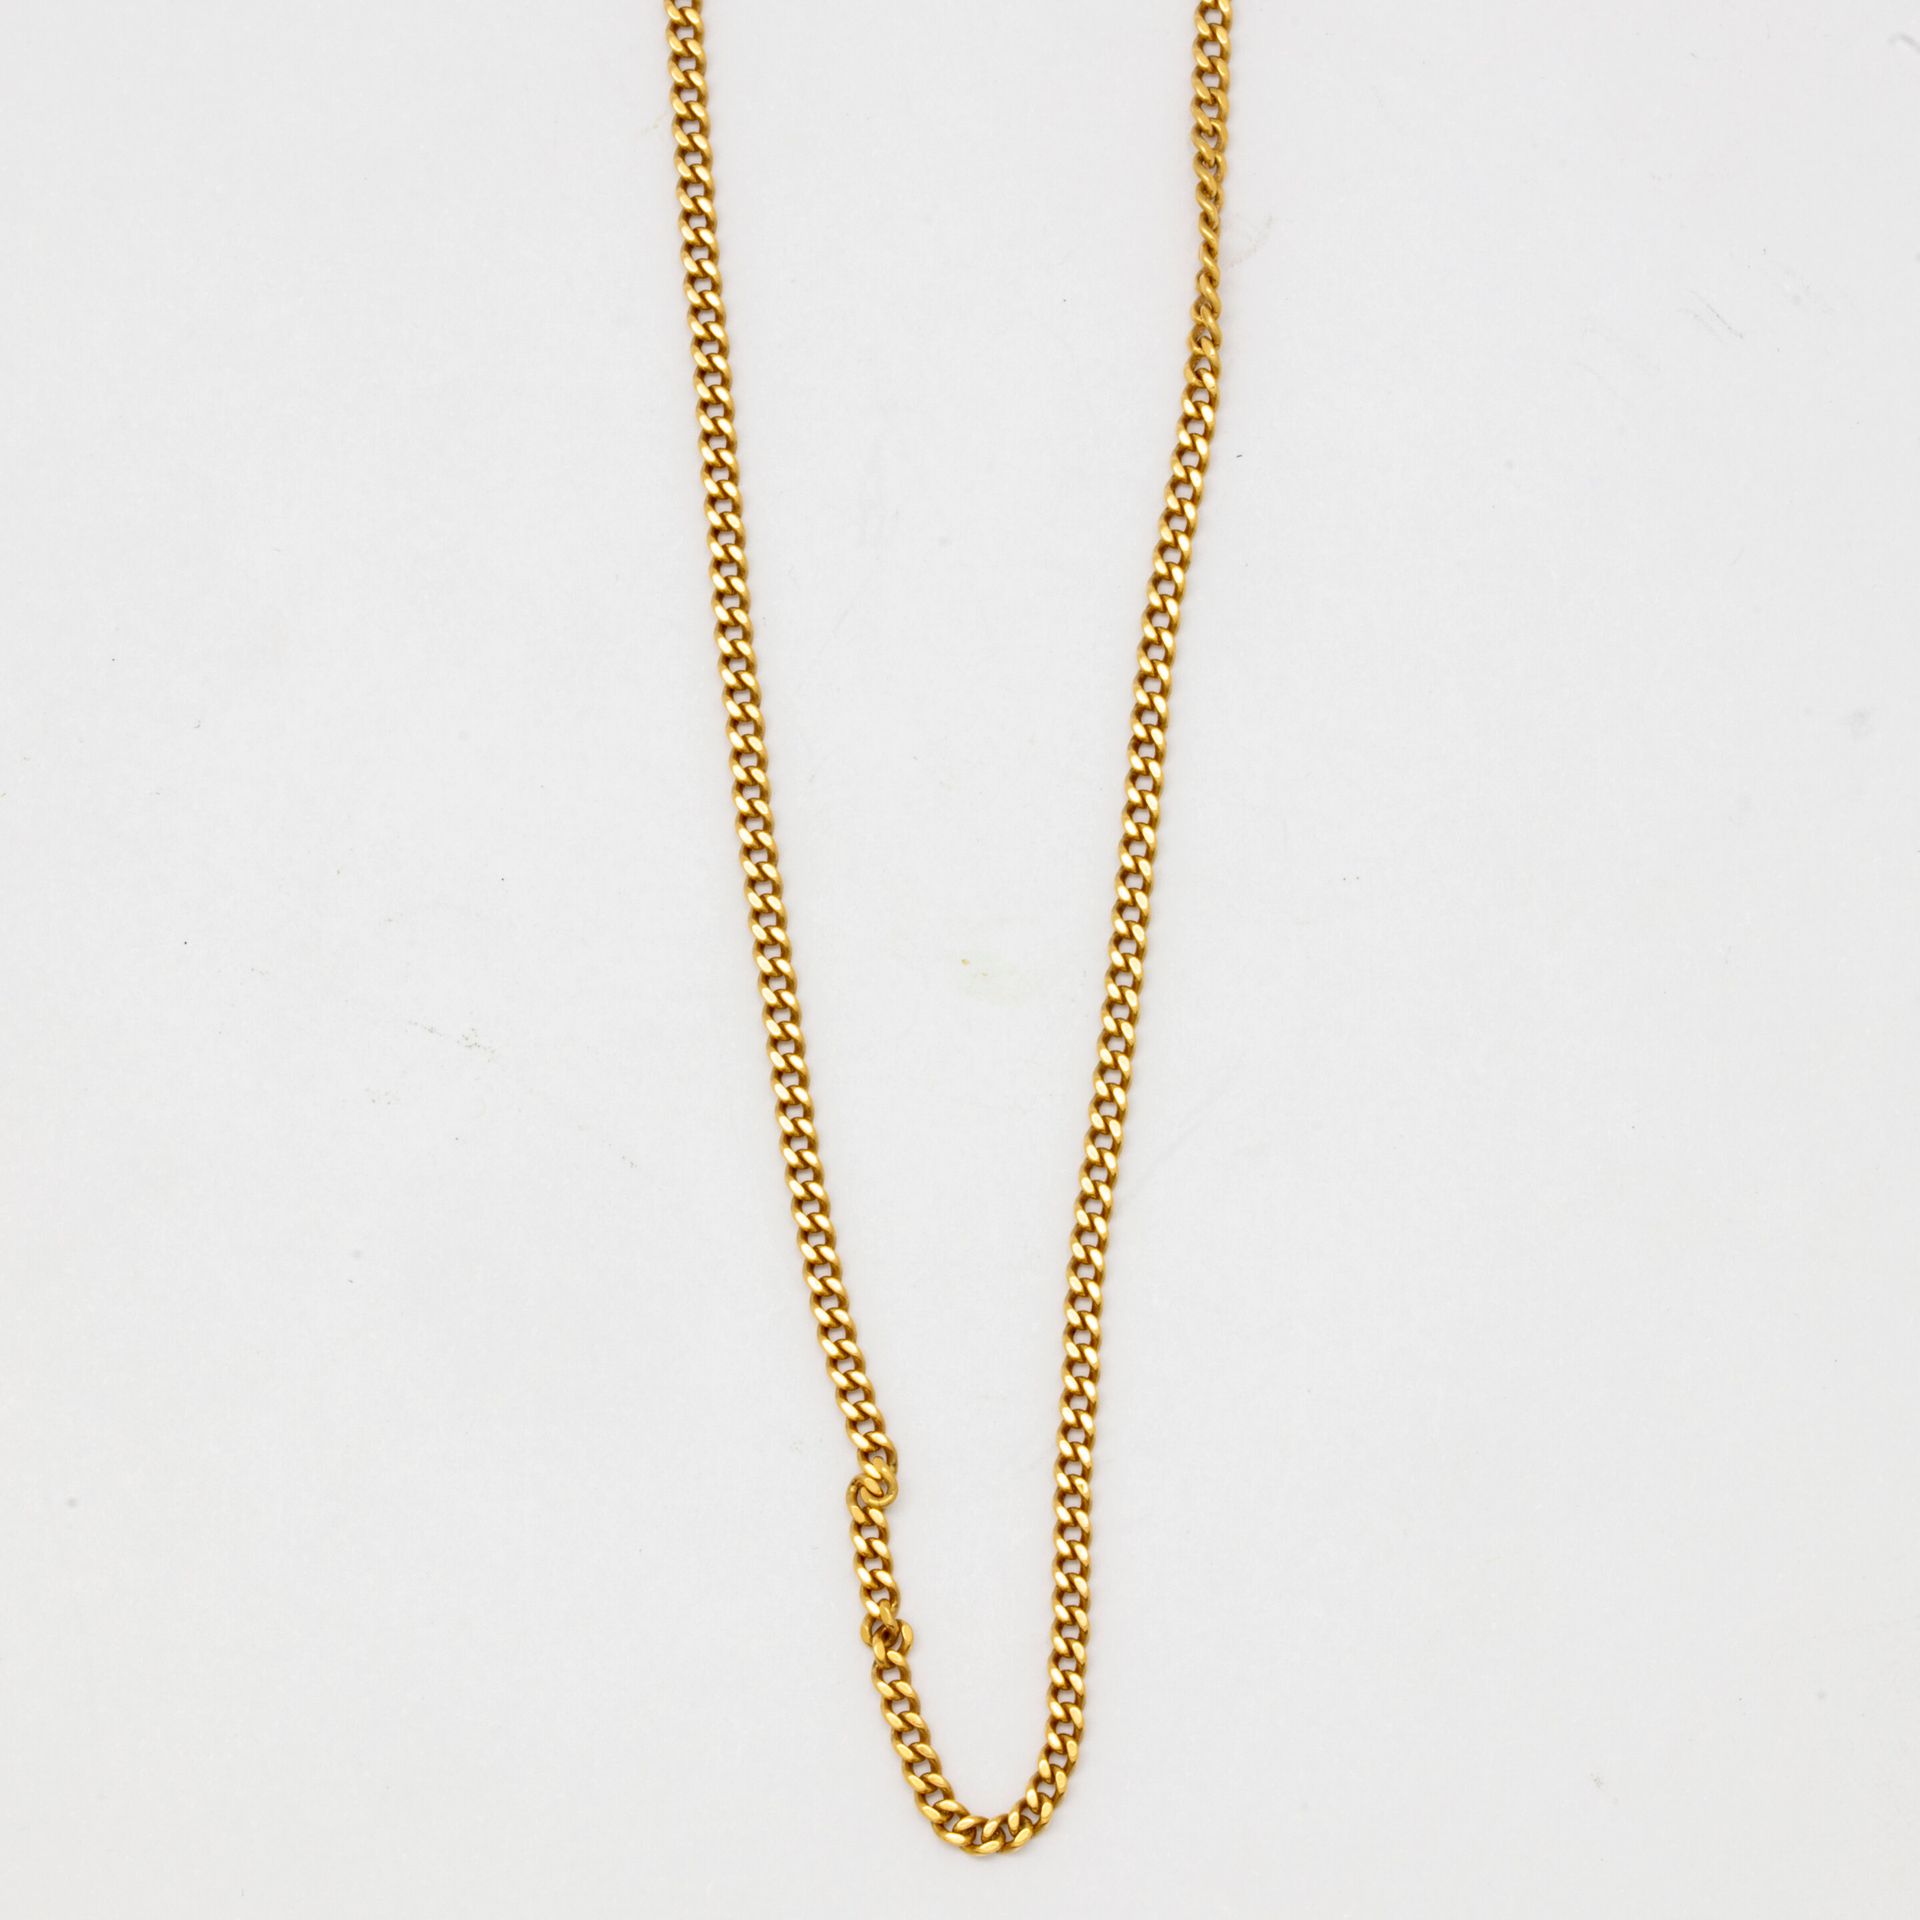 Null Yellow gold chain

Weight : 9,19 g.